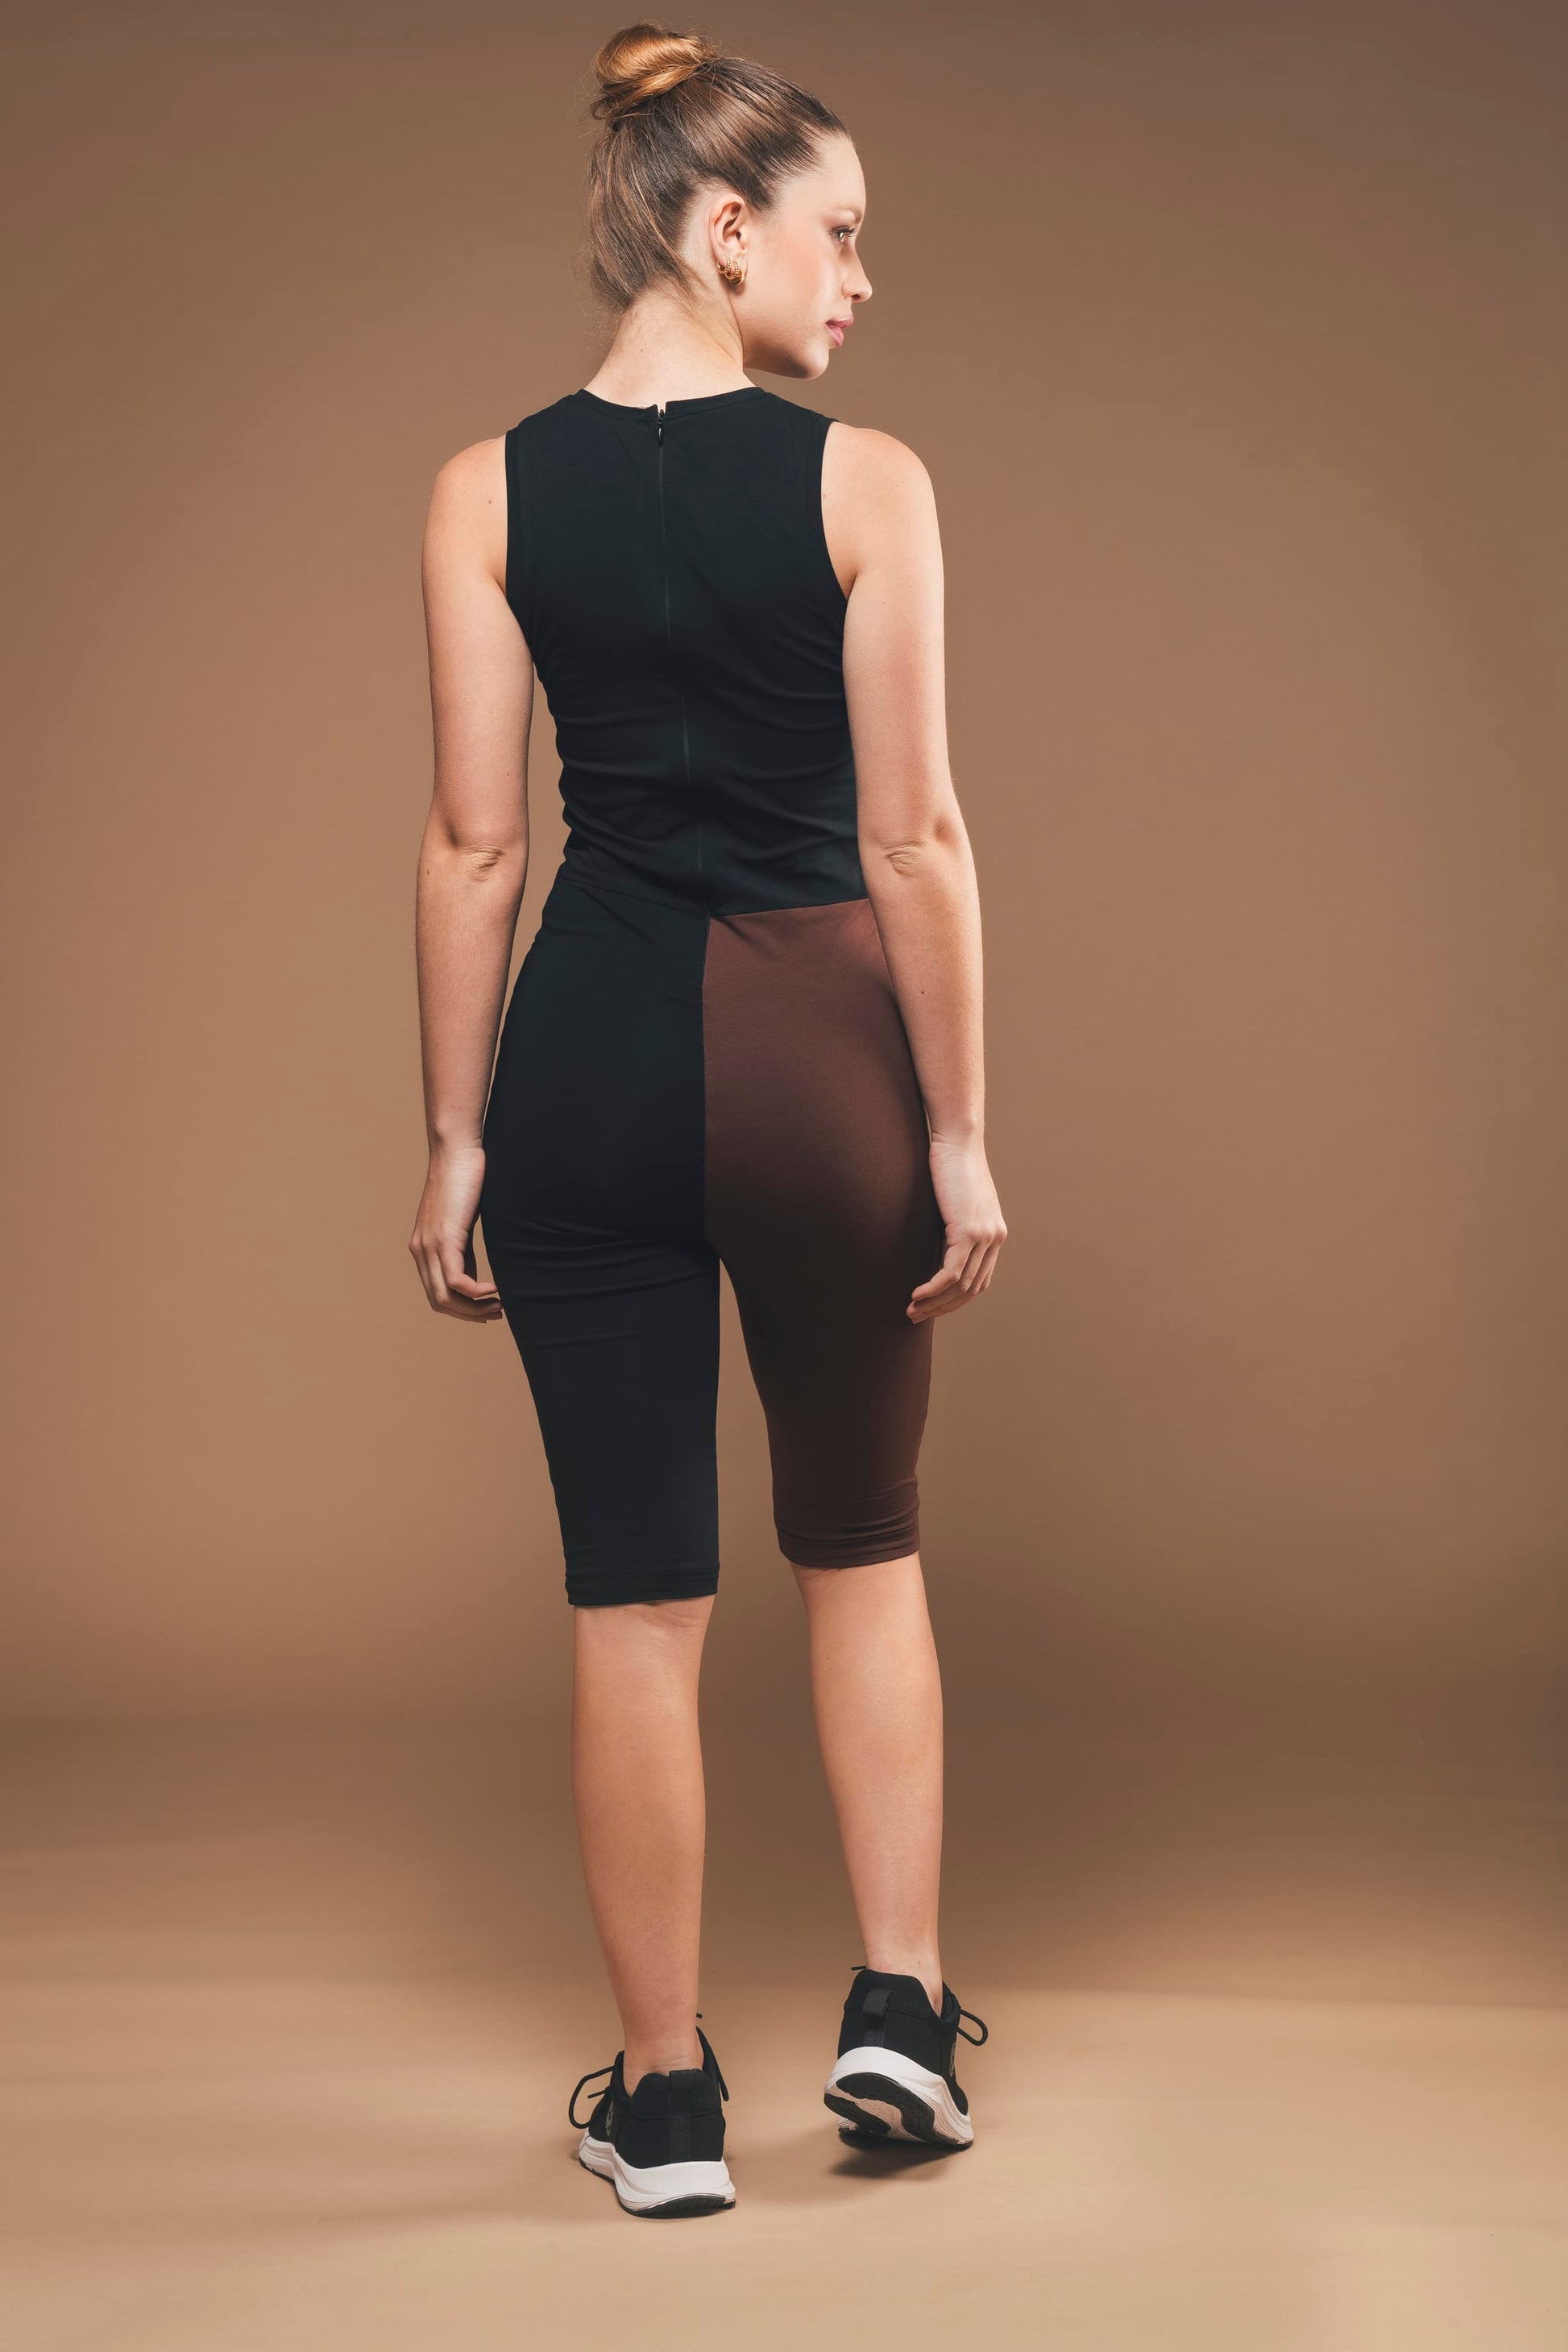 cycling jumpsuit in black and brown